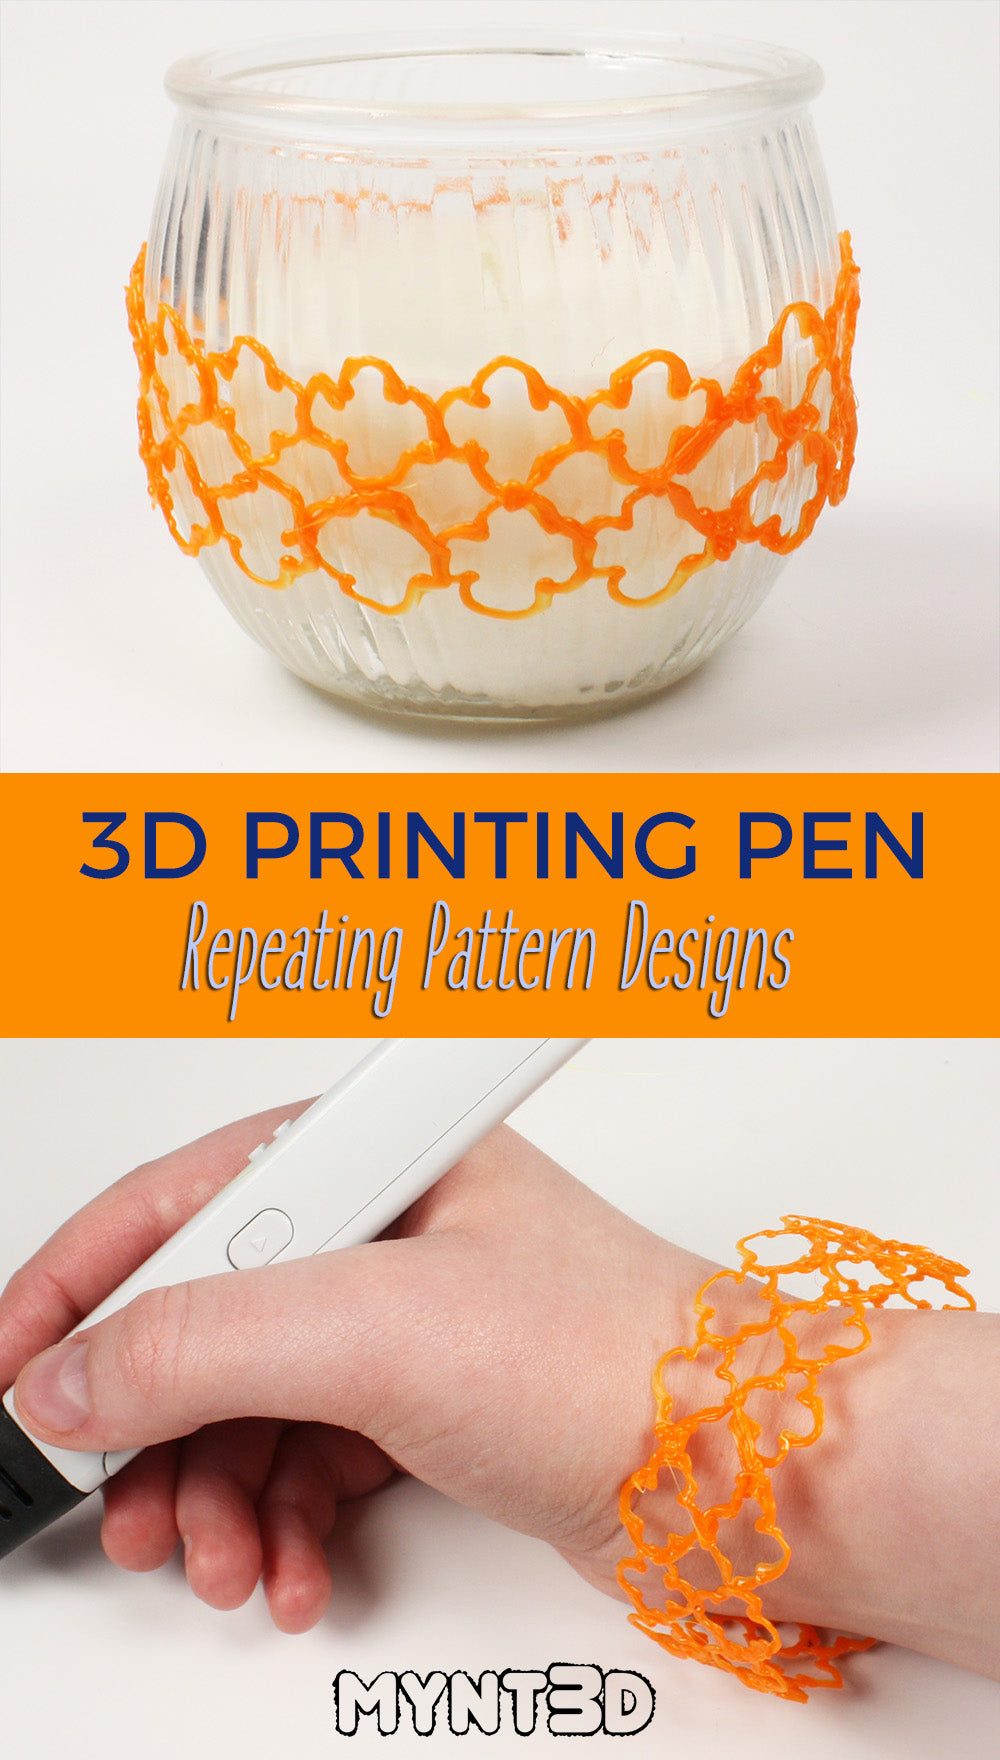 Draw 3D pen bracelets, vase covers, containers and patterned structures with repeat design pattern templates from MYNT3D. Get the free traceable stencils  of herringbone brick, scallop, geometric cubes, basket weave and quatrefoil off the projects page of the website and draw 3D textured shapes and geometric objects.